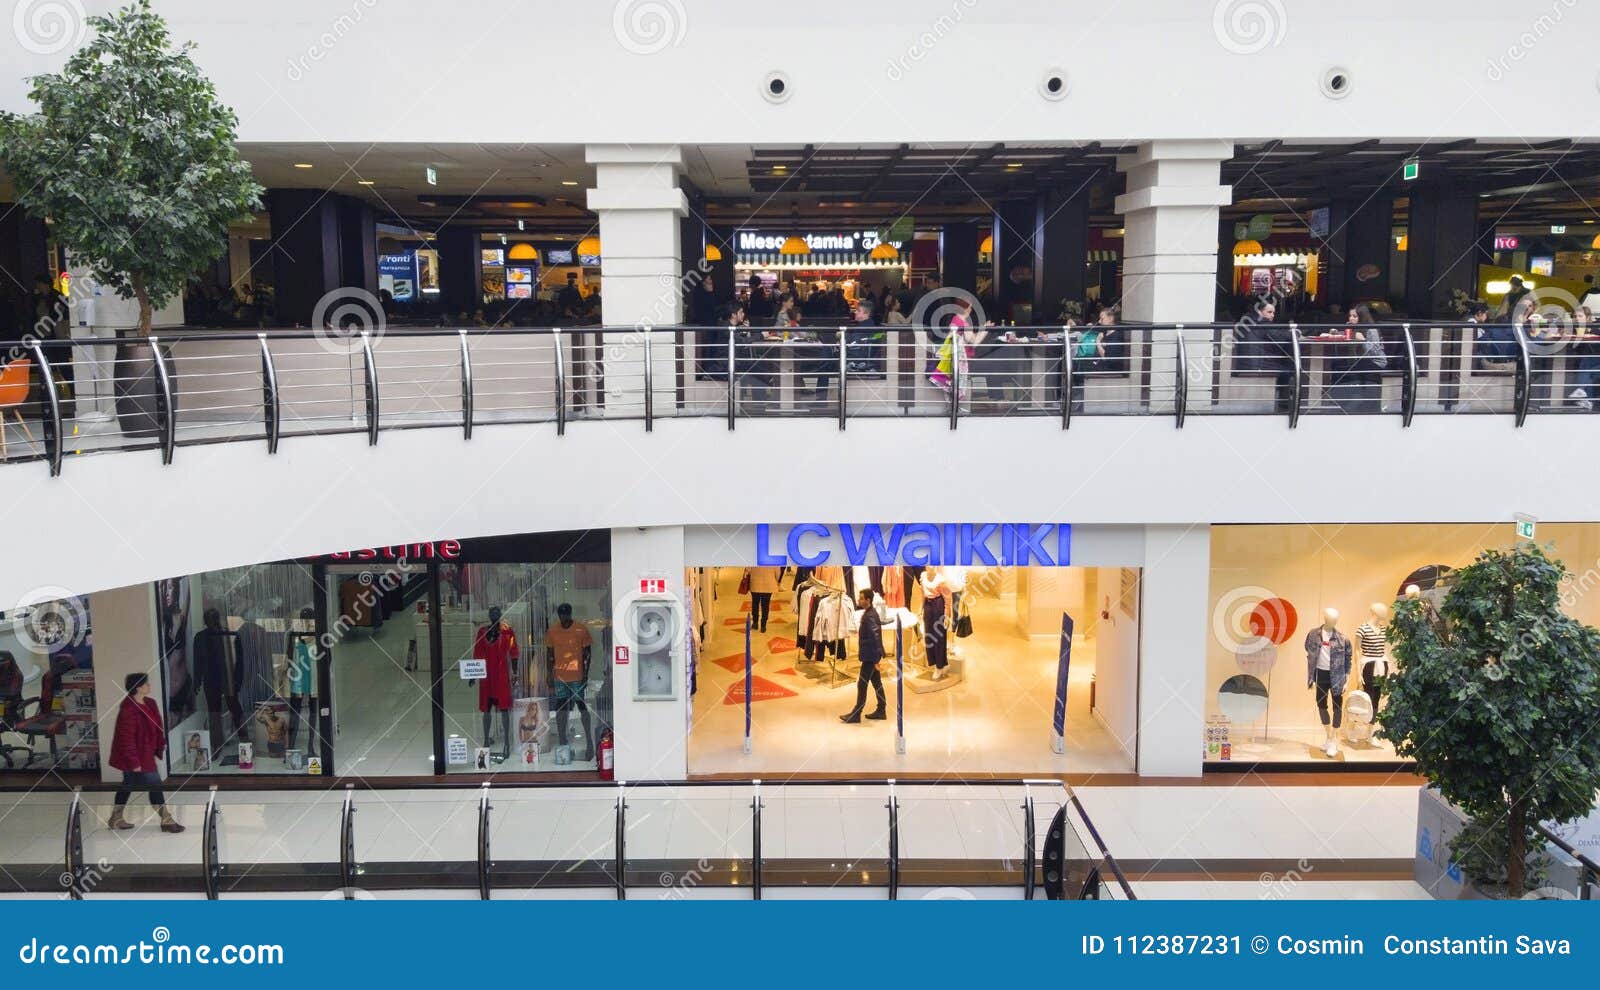 Fashion Store Restaurants in a Shopping Mall Editorial Photo - Image of crowded, abstract: 112387231